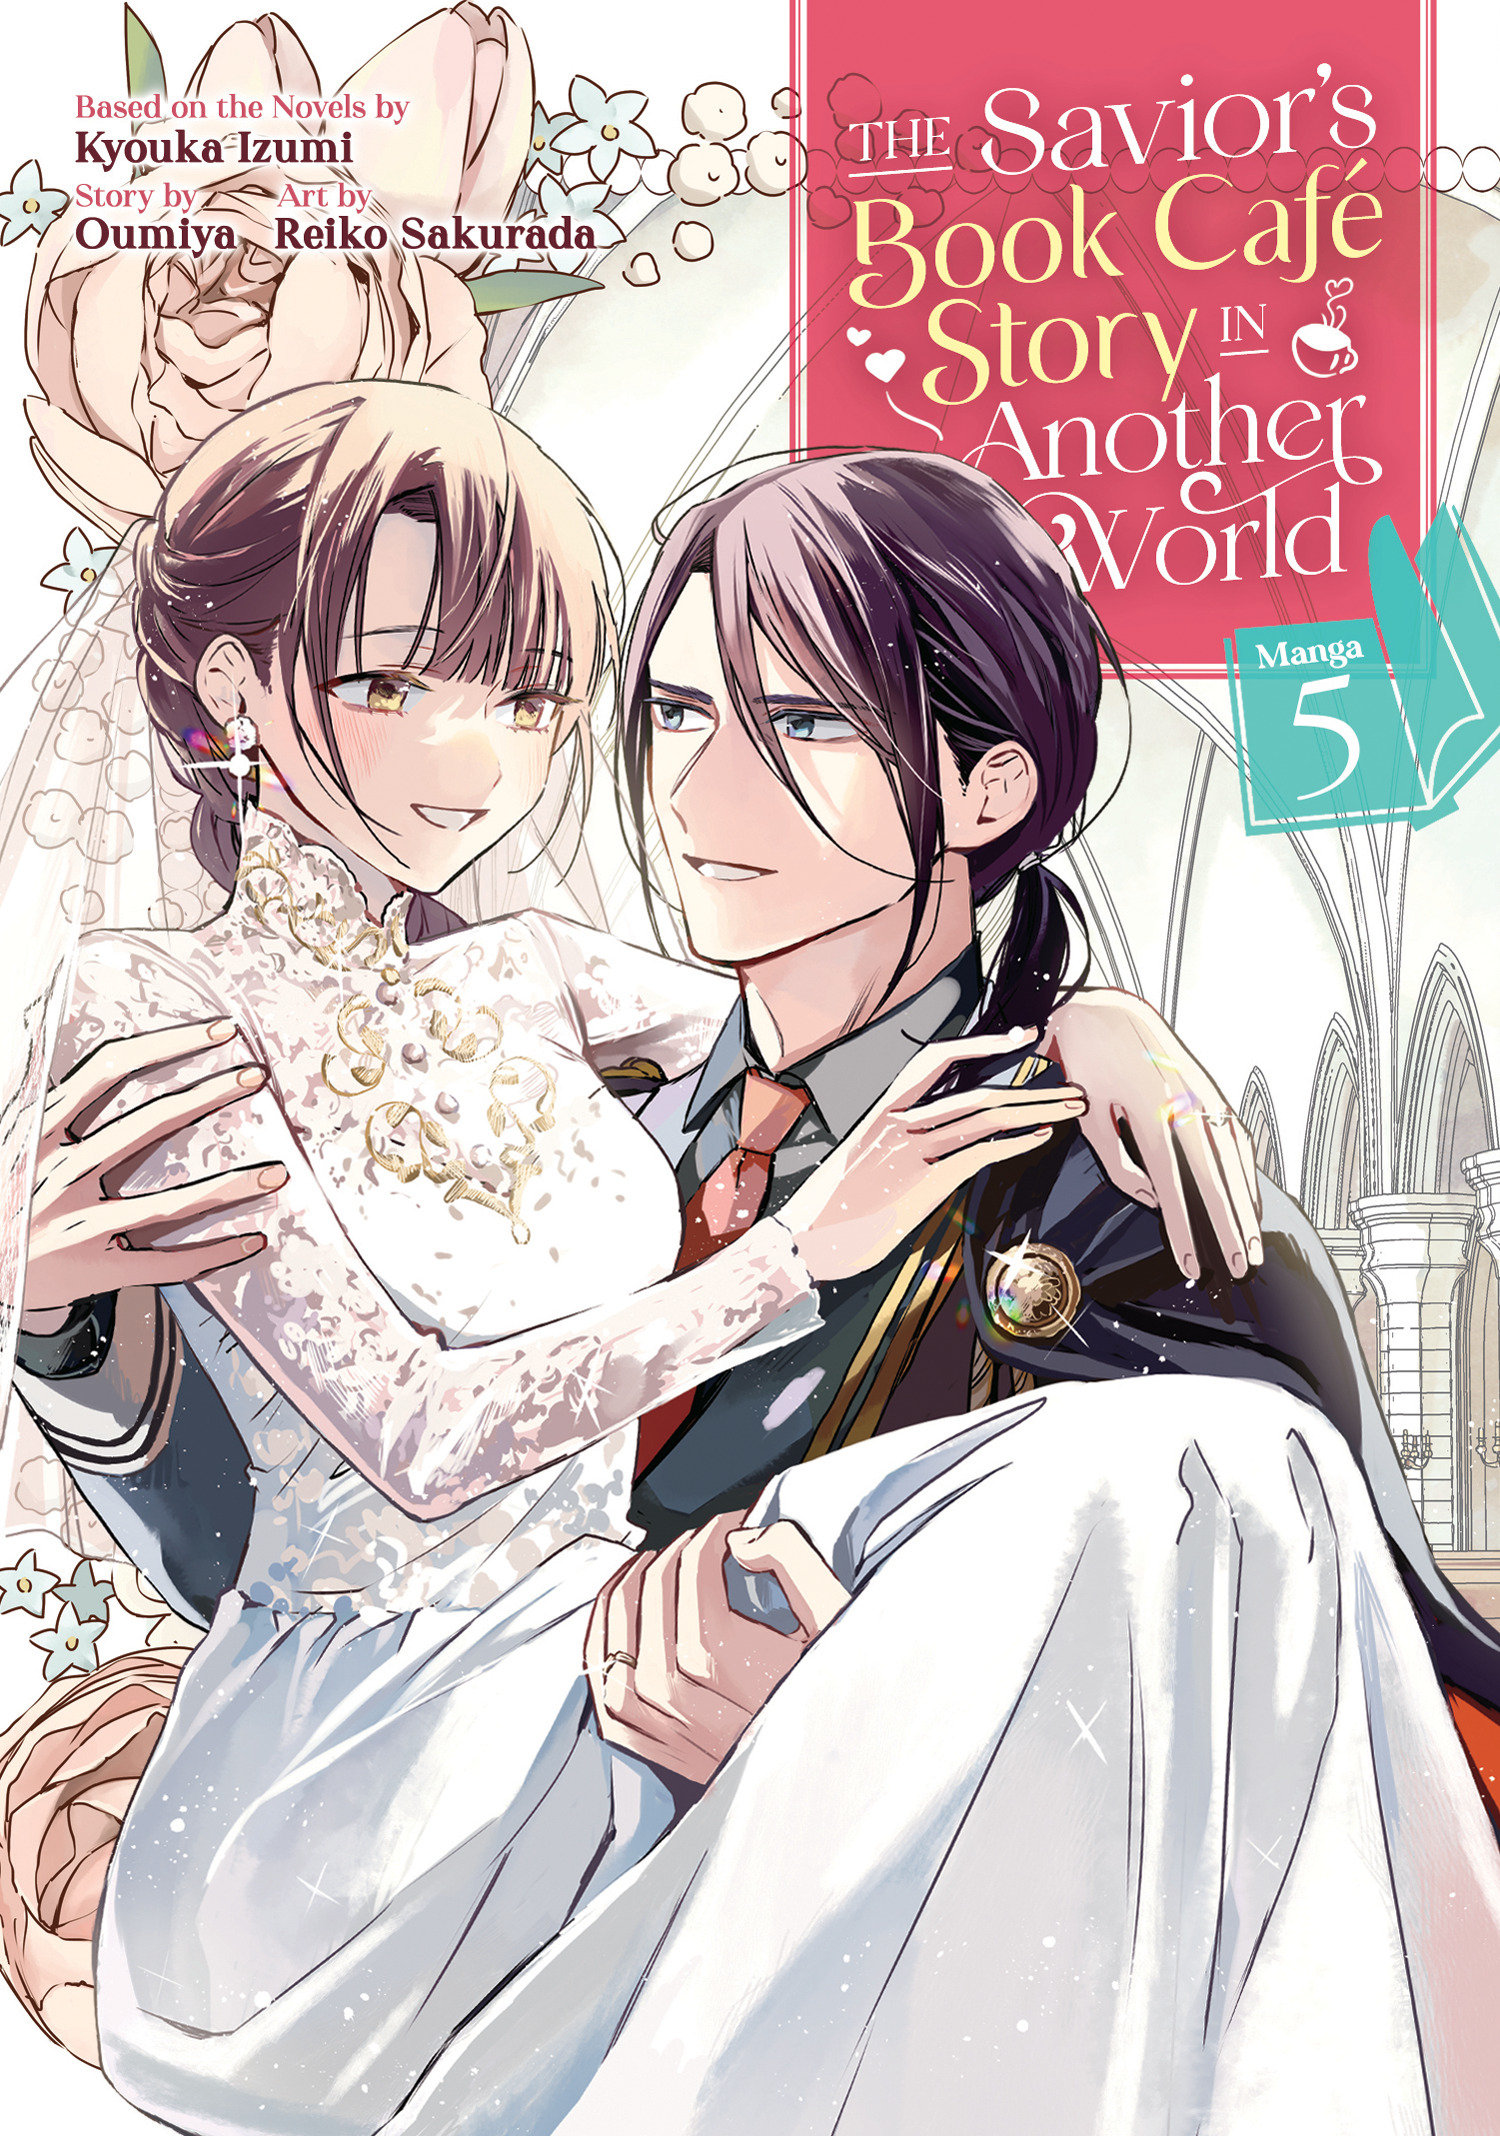 The Savior's Book Café Story in Another World Manga Volume 5